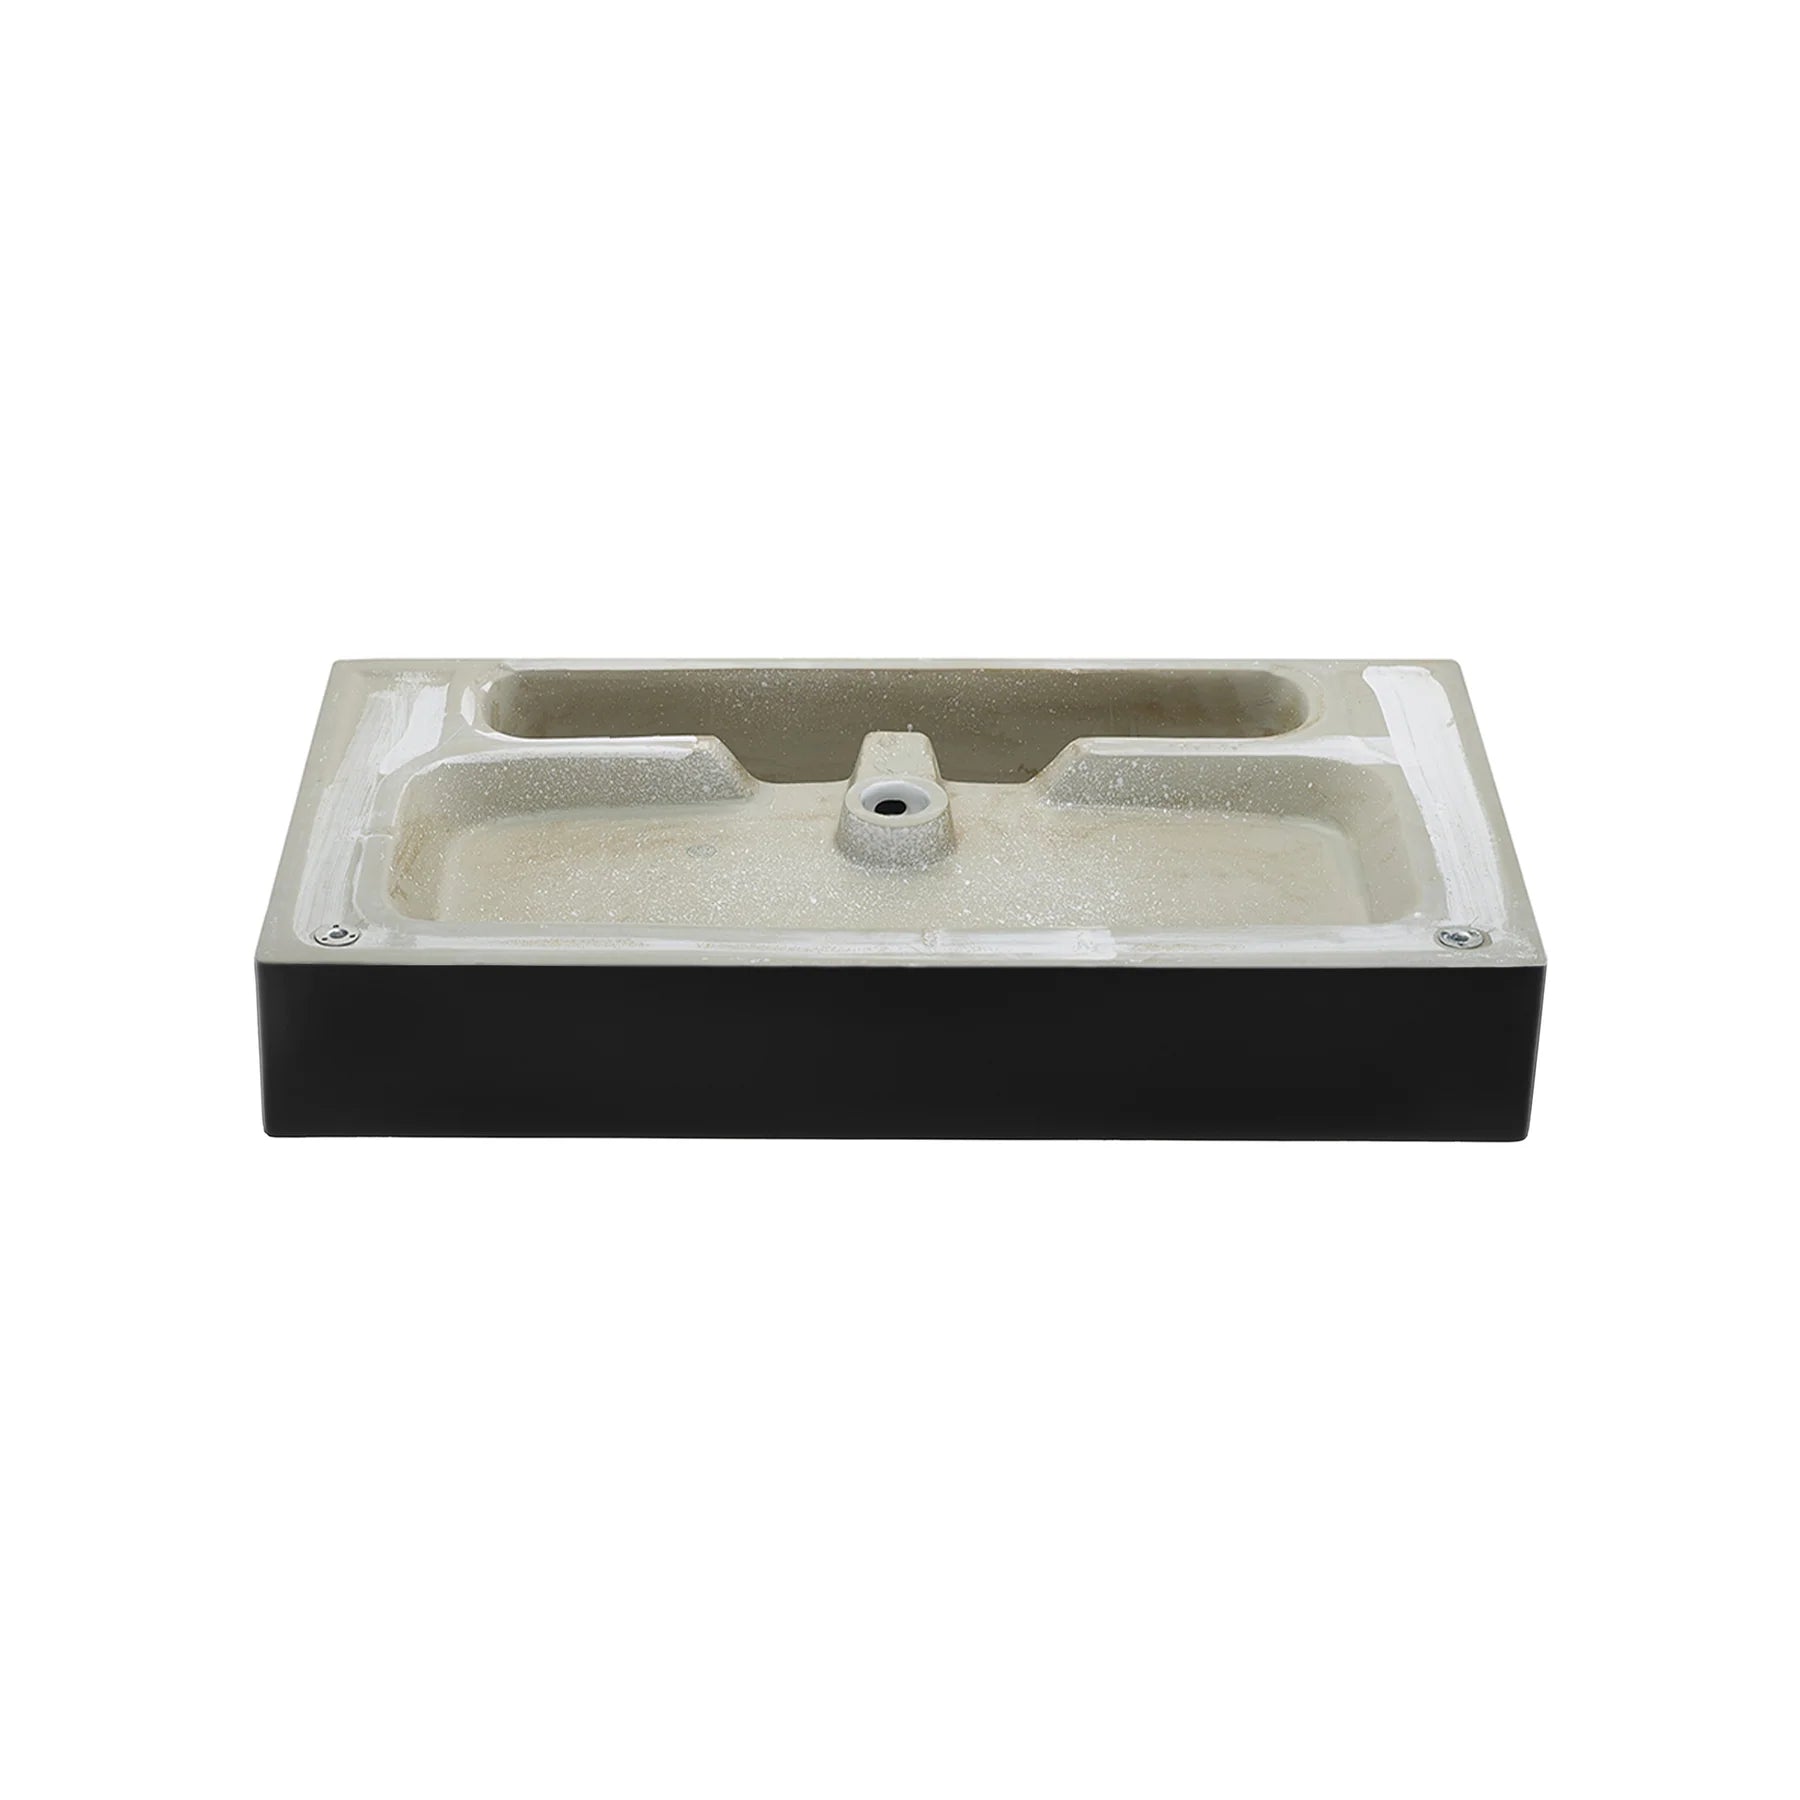 Swiss Madison Claire 30” Rectangle Wall-Mount Bathroom Sink in Matte Black - SM-WS333MB